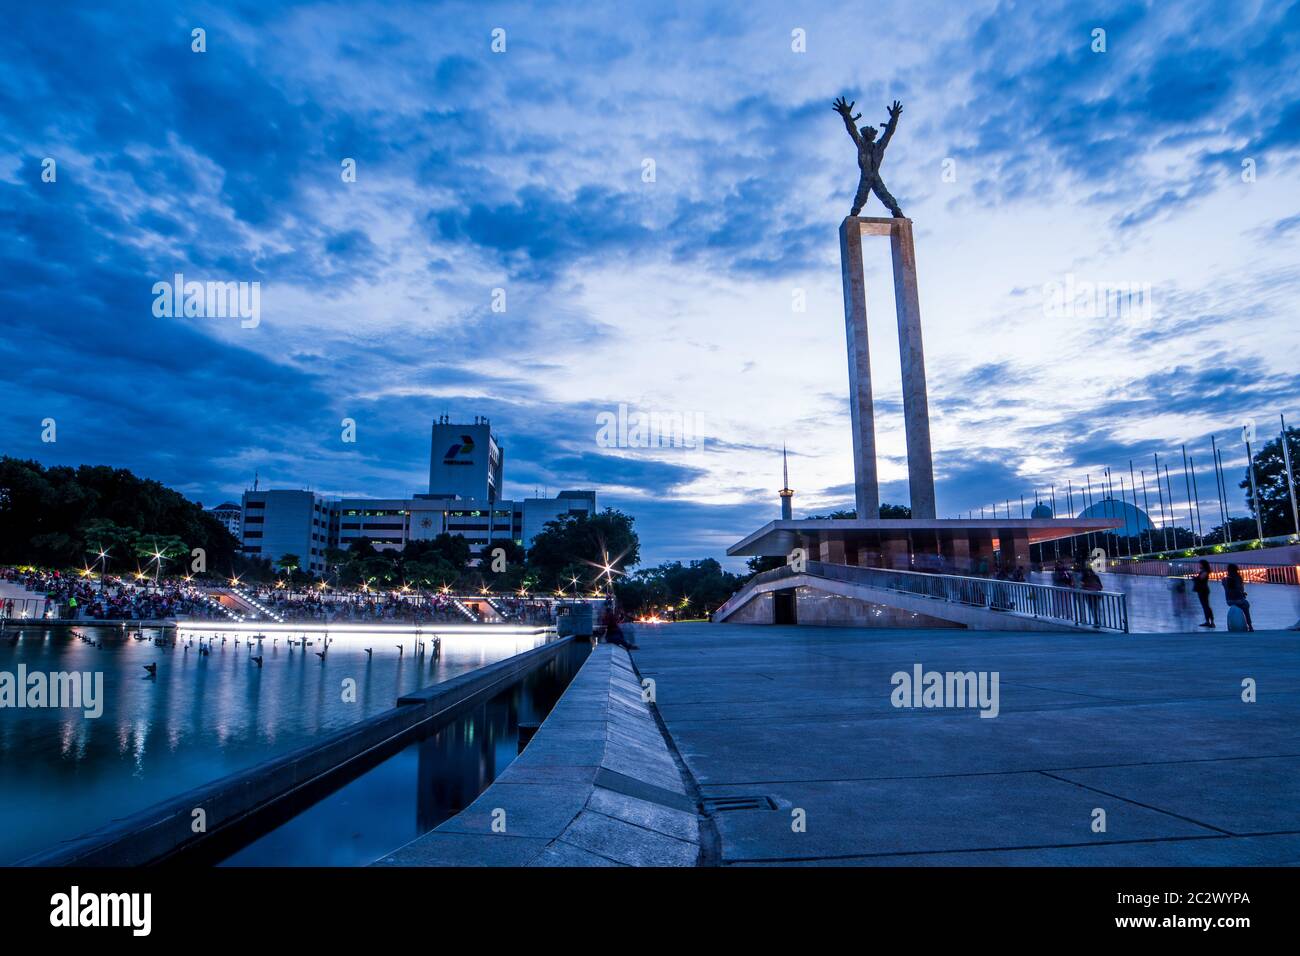 The Beauty of Statue of Irian Jaya Liberation Monument, Jakarta with cloudy sky in the evening Stock Photo